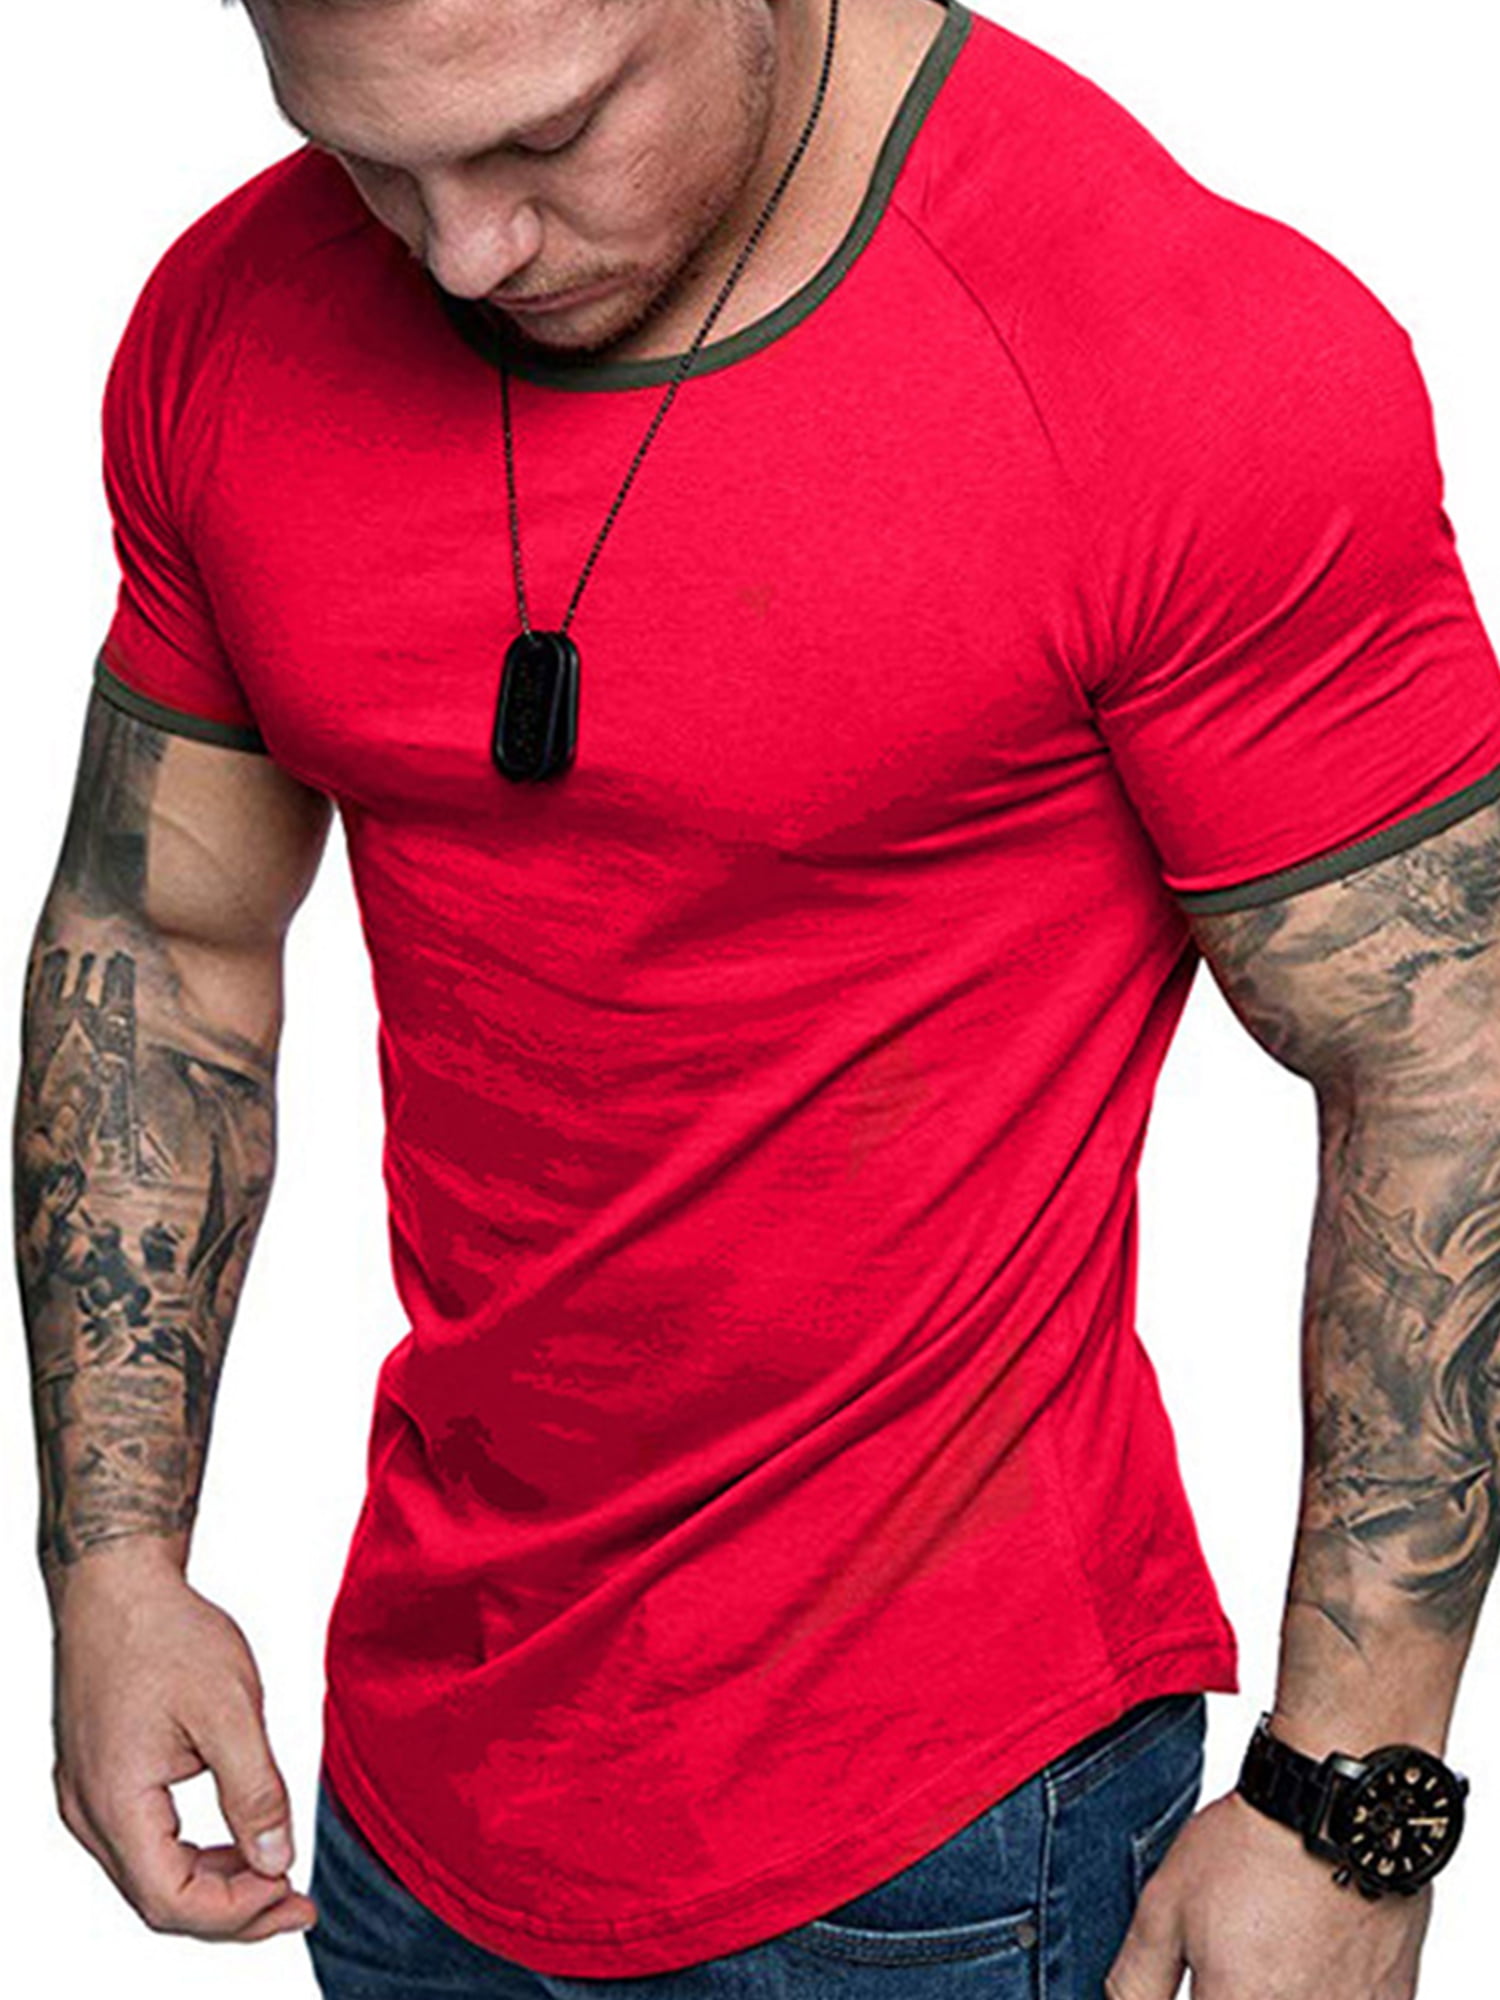 Lallc - Mens Slim Fit Short Sleeve T Shirt Muscle Tee Casual Tops ...